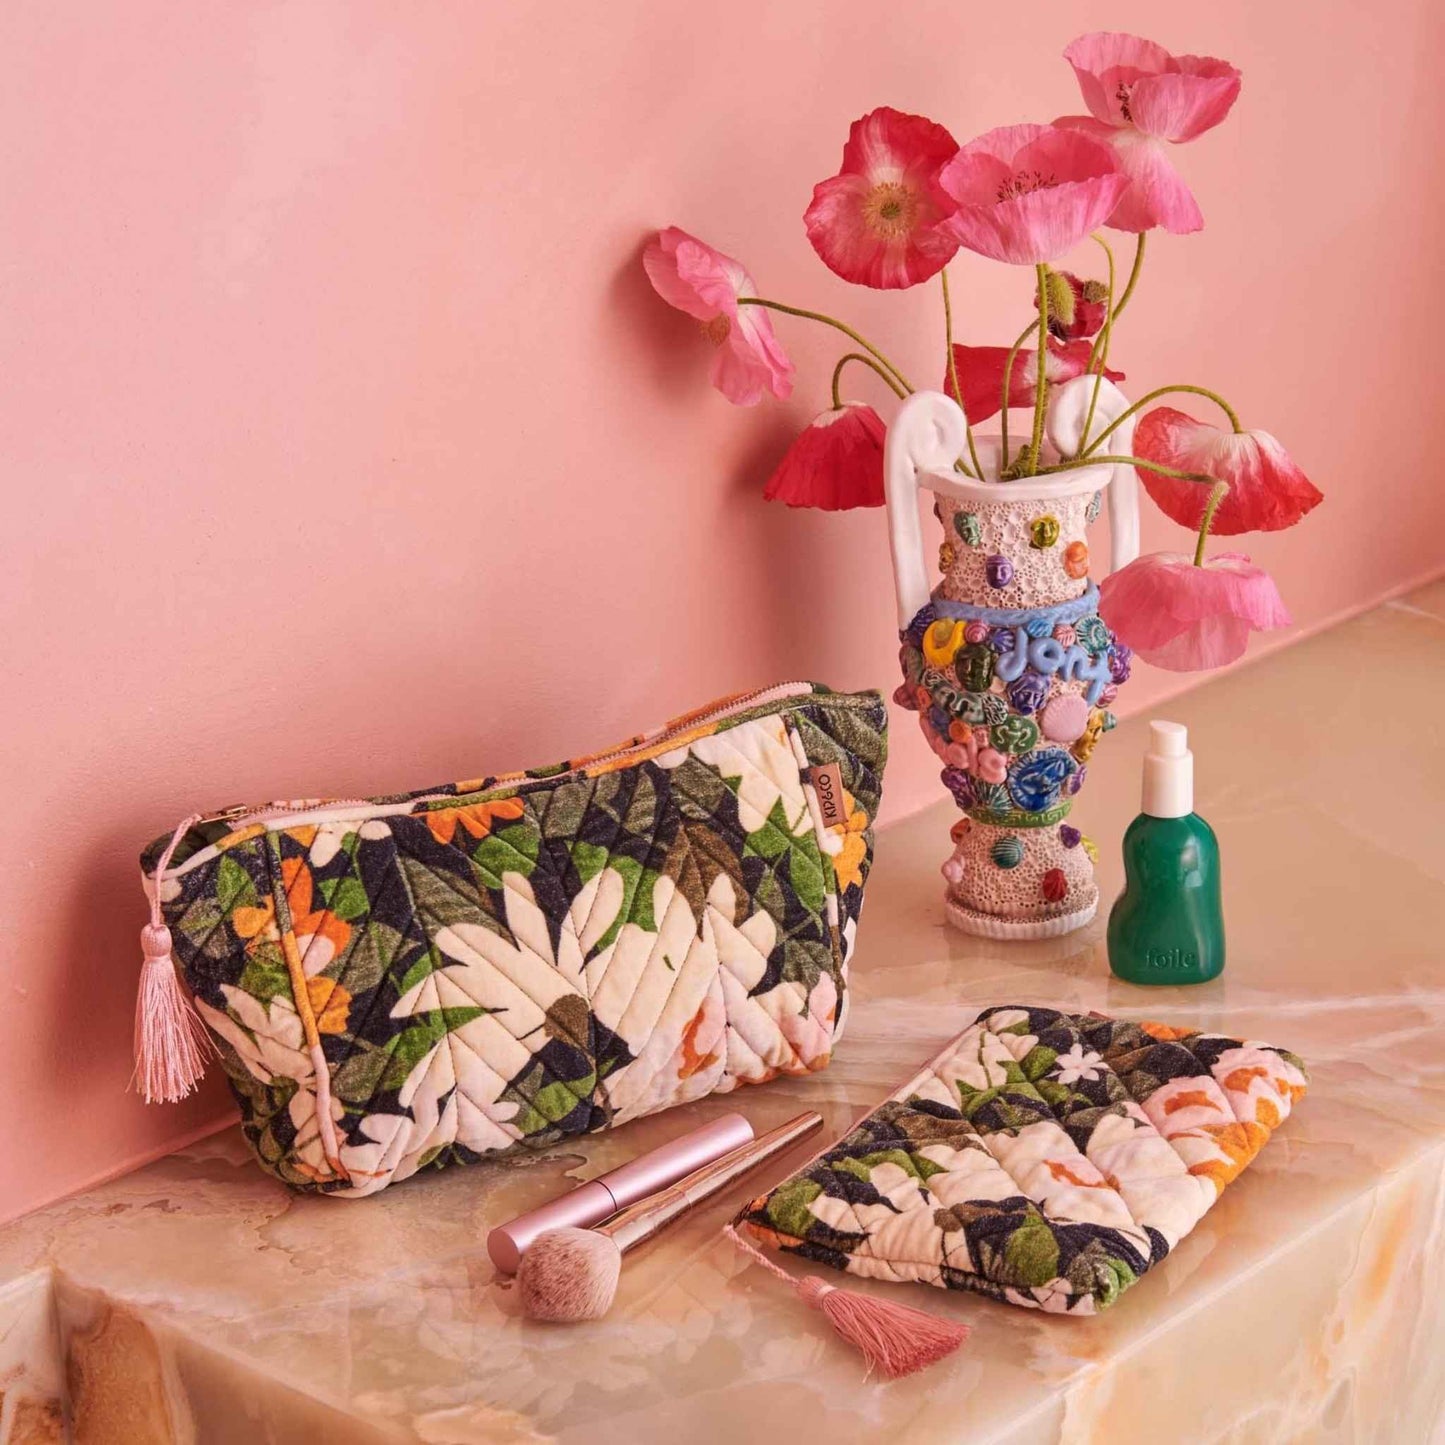 The Dreamy Floral Velvet Toiletry Bag from Kip & Co features printed quilted velvet with wild garden florals in shades of pink, orange, cream and white with hints of greenery on a black base with feature pink zip tassel.